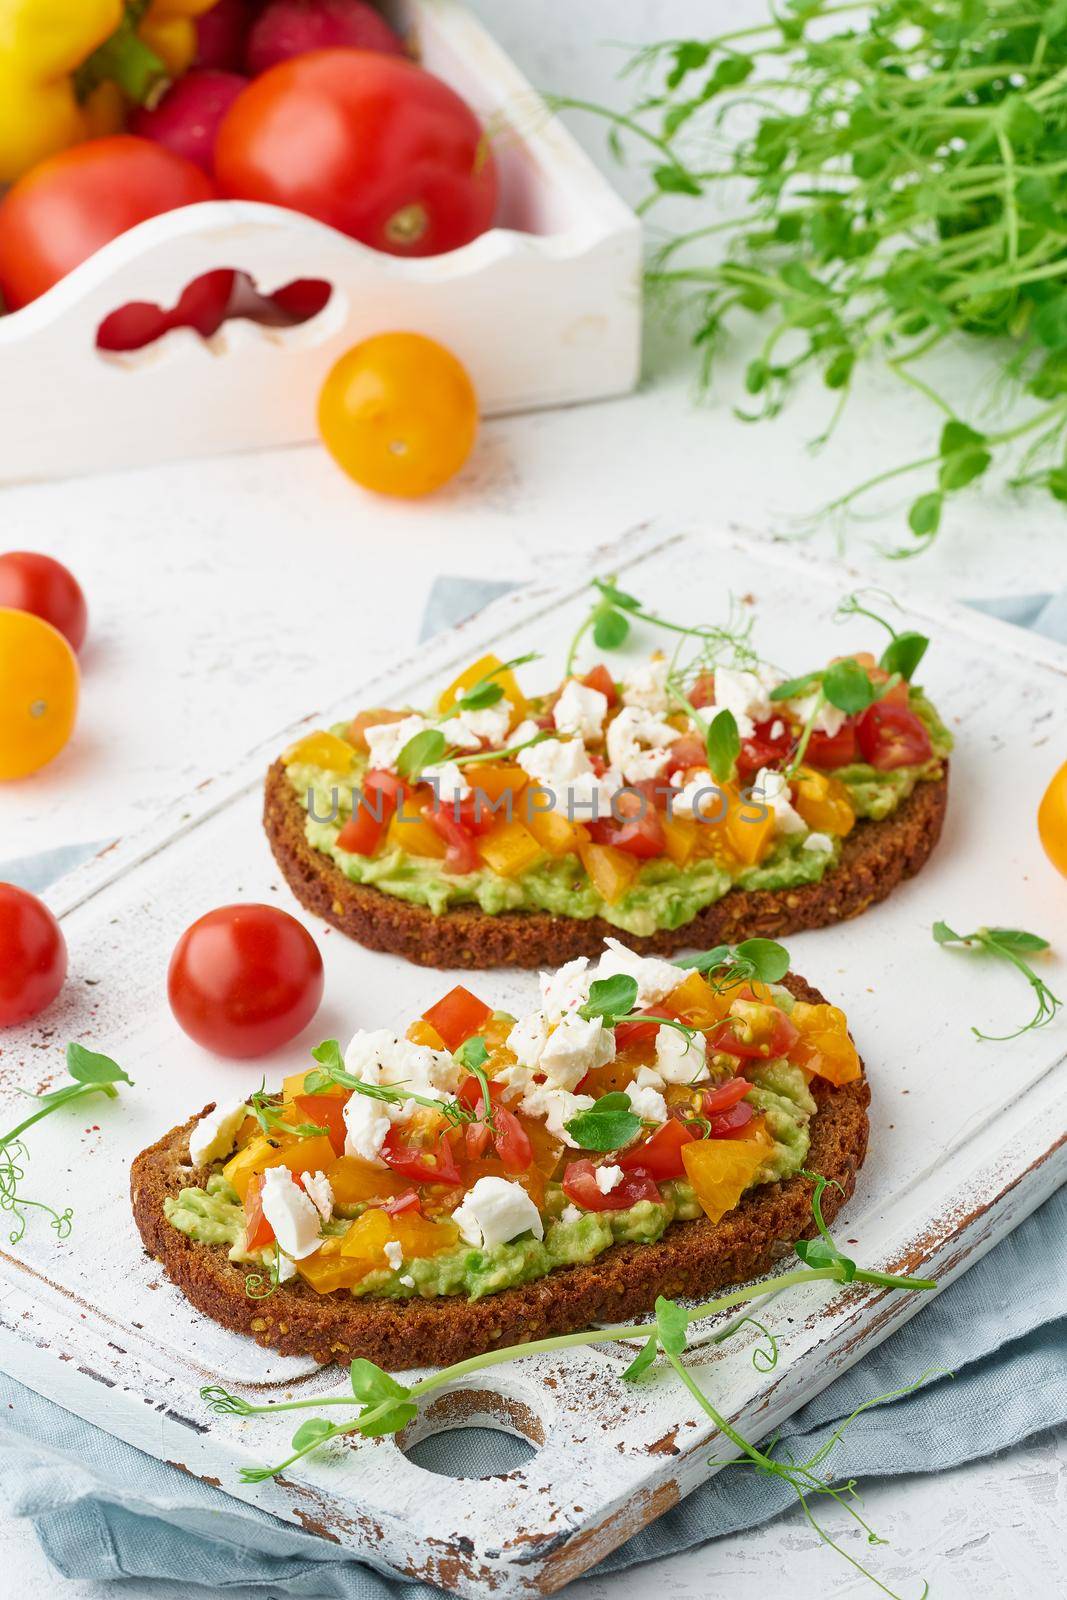 avocado toast with feta and tomatoes, smorrebrod with ricotta, closeup and vertical